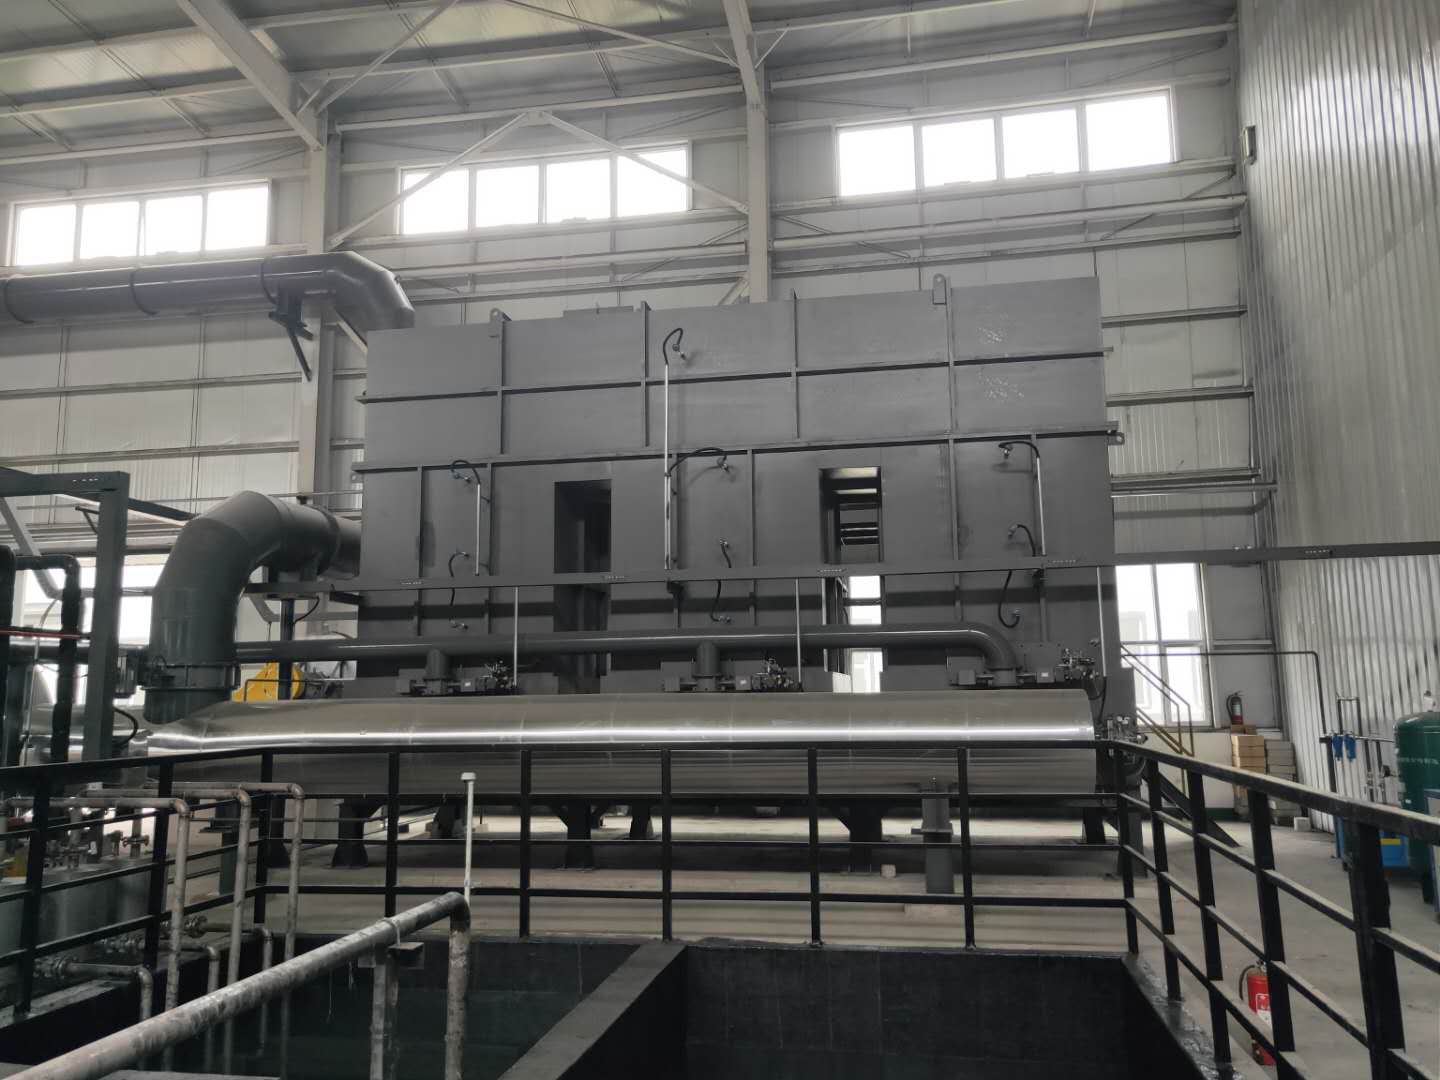 The installation of exhaust gas incineration and desulfurization system was successfully completed